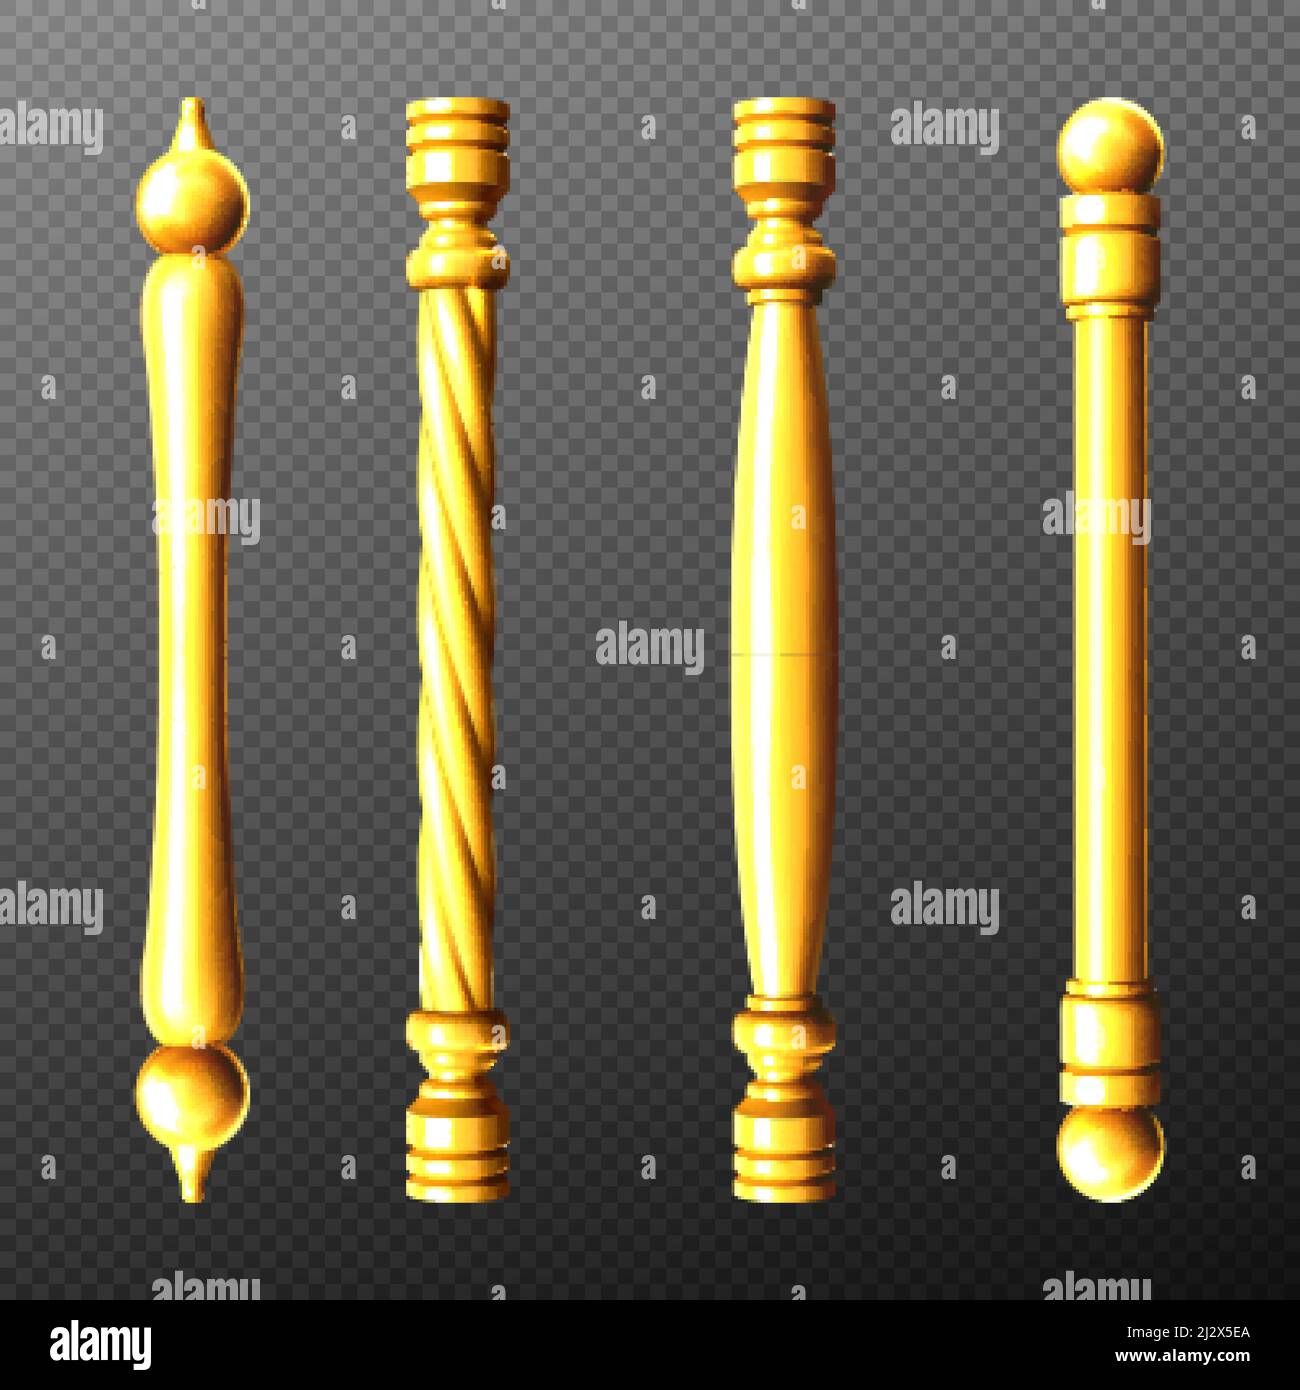 Gold door handles, column and twisted knobs bar shapes isolated on transparent background. Golden doorknob elements for interior design, yellow metal Stock Vector